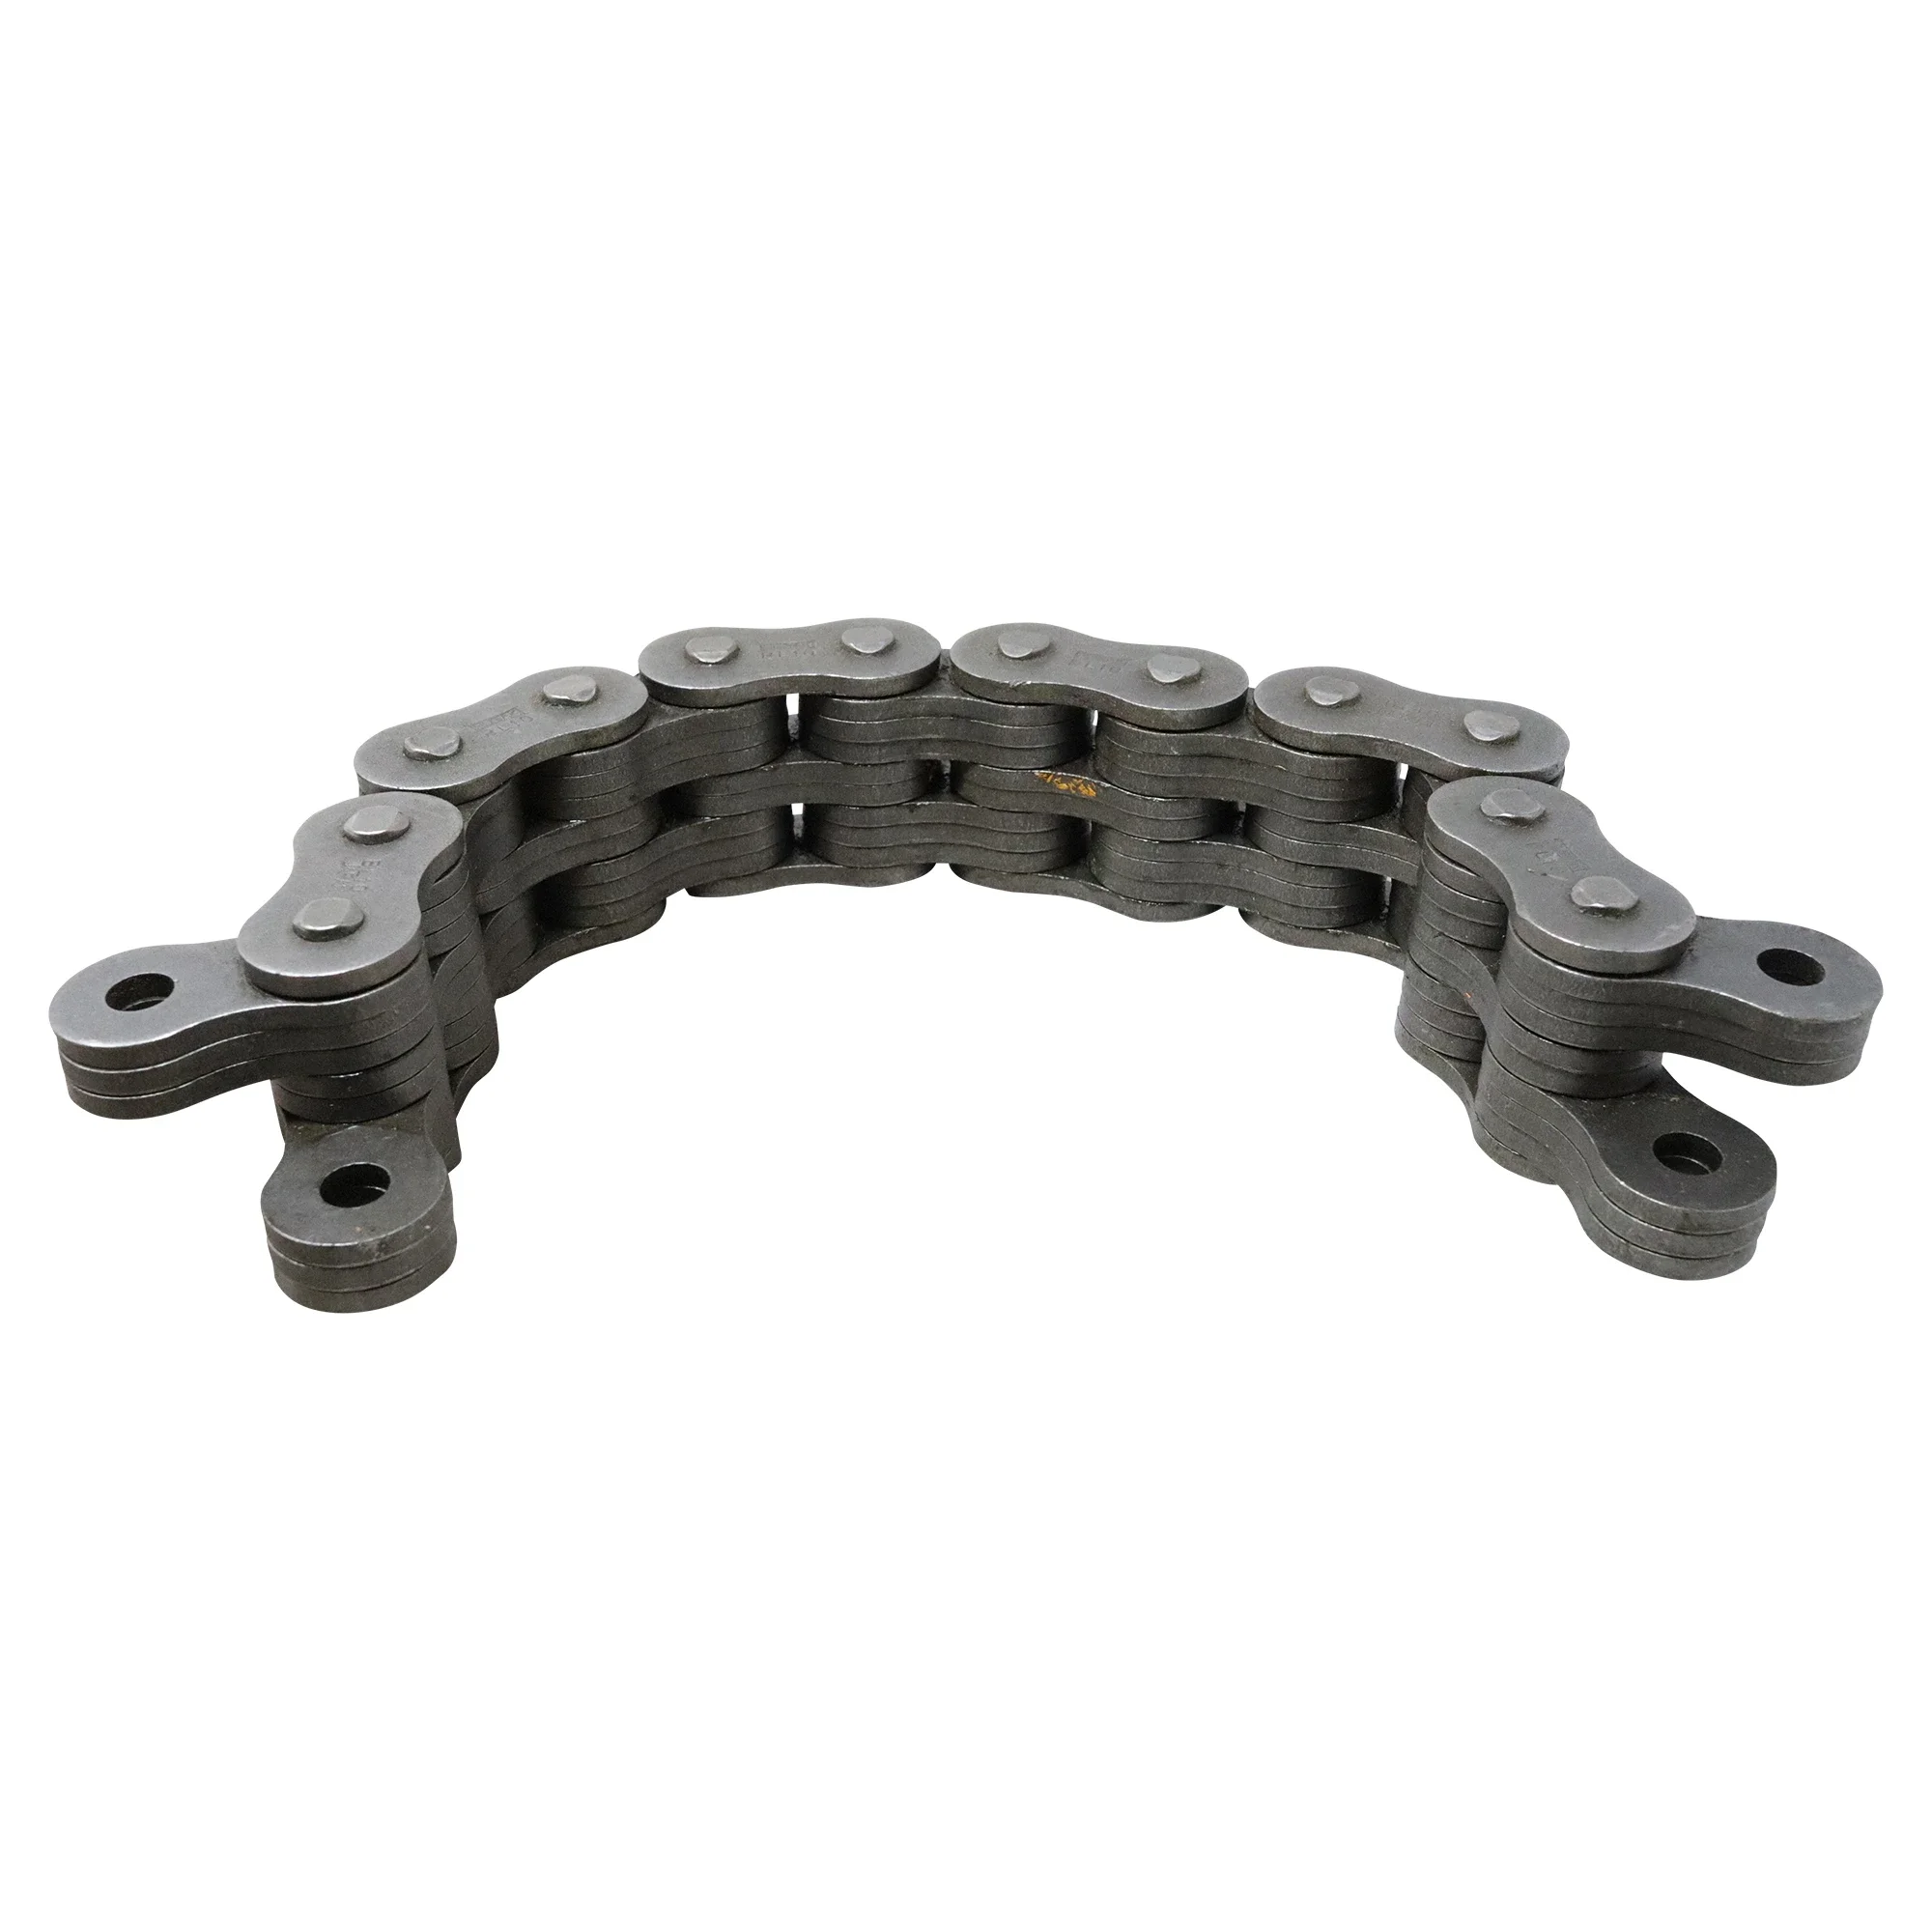 Wastebuilt® Replacement for New Way Chain 4X6 1-29/32" Wide ASL